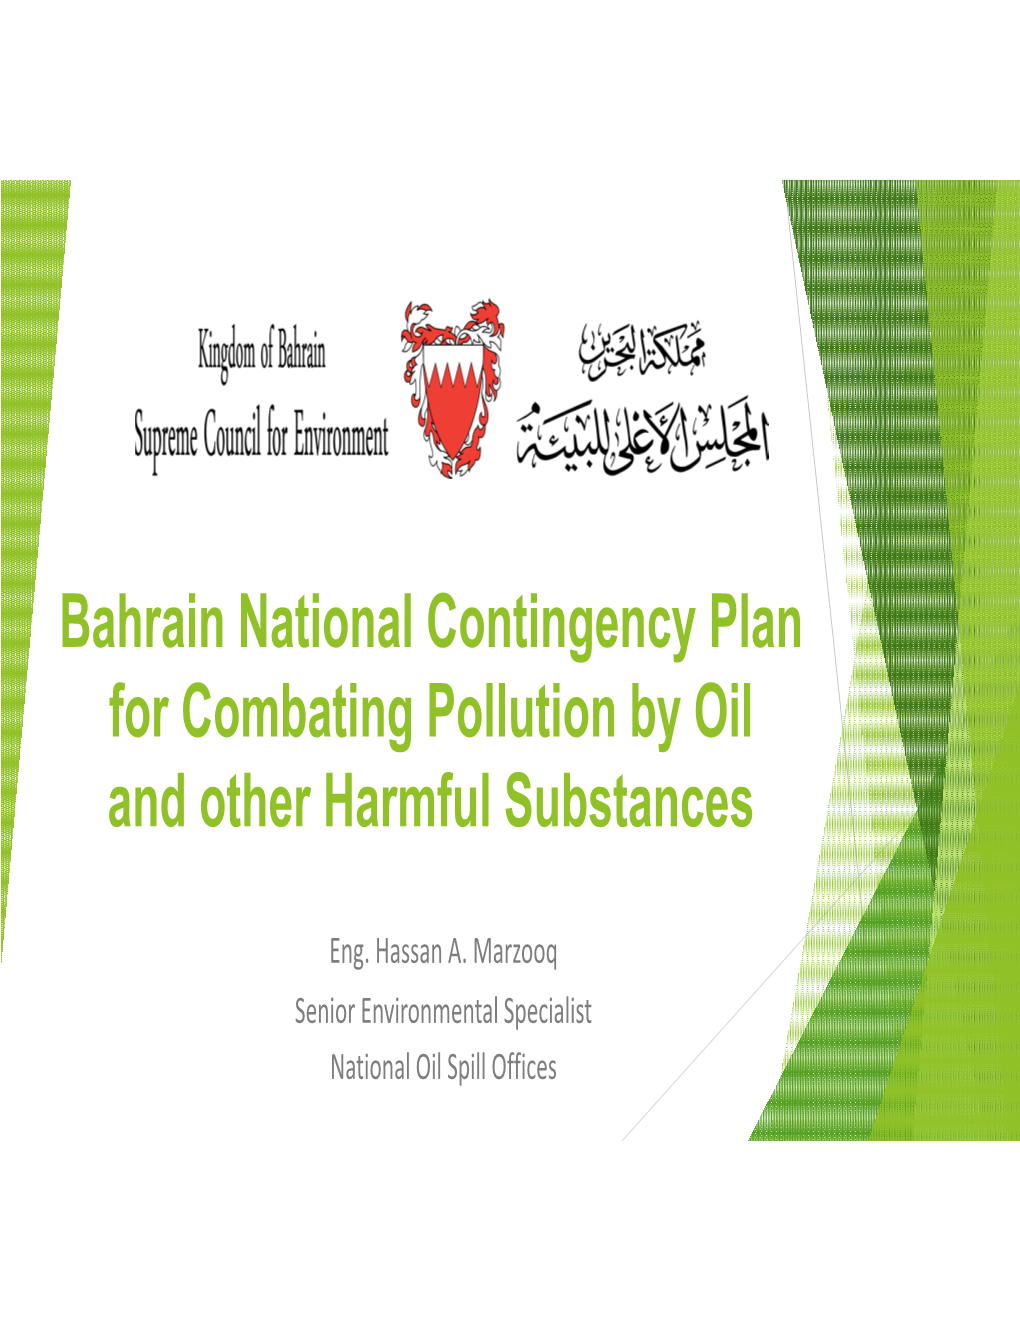 Bahrain National Contingency Plan for Combating Pollution by Oil and Other Harmful Substances